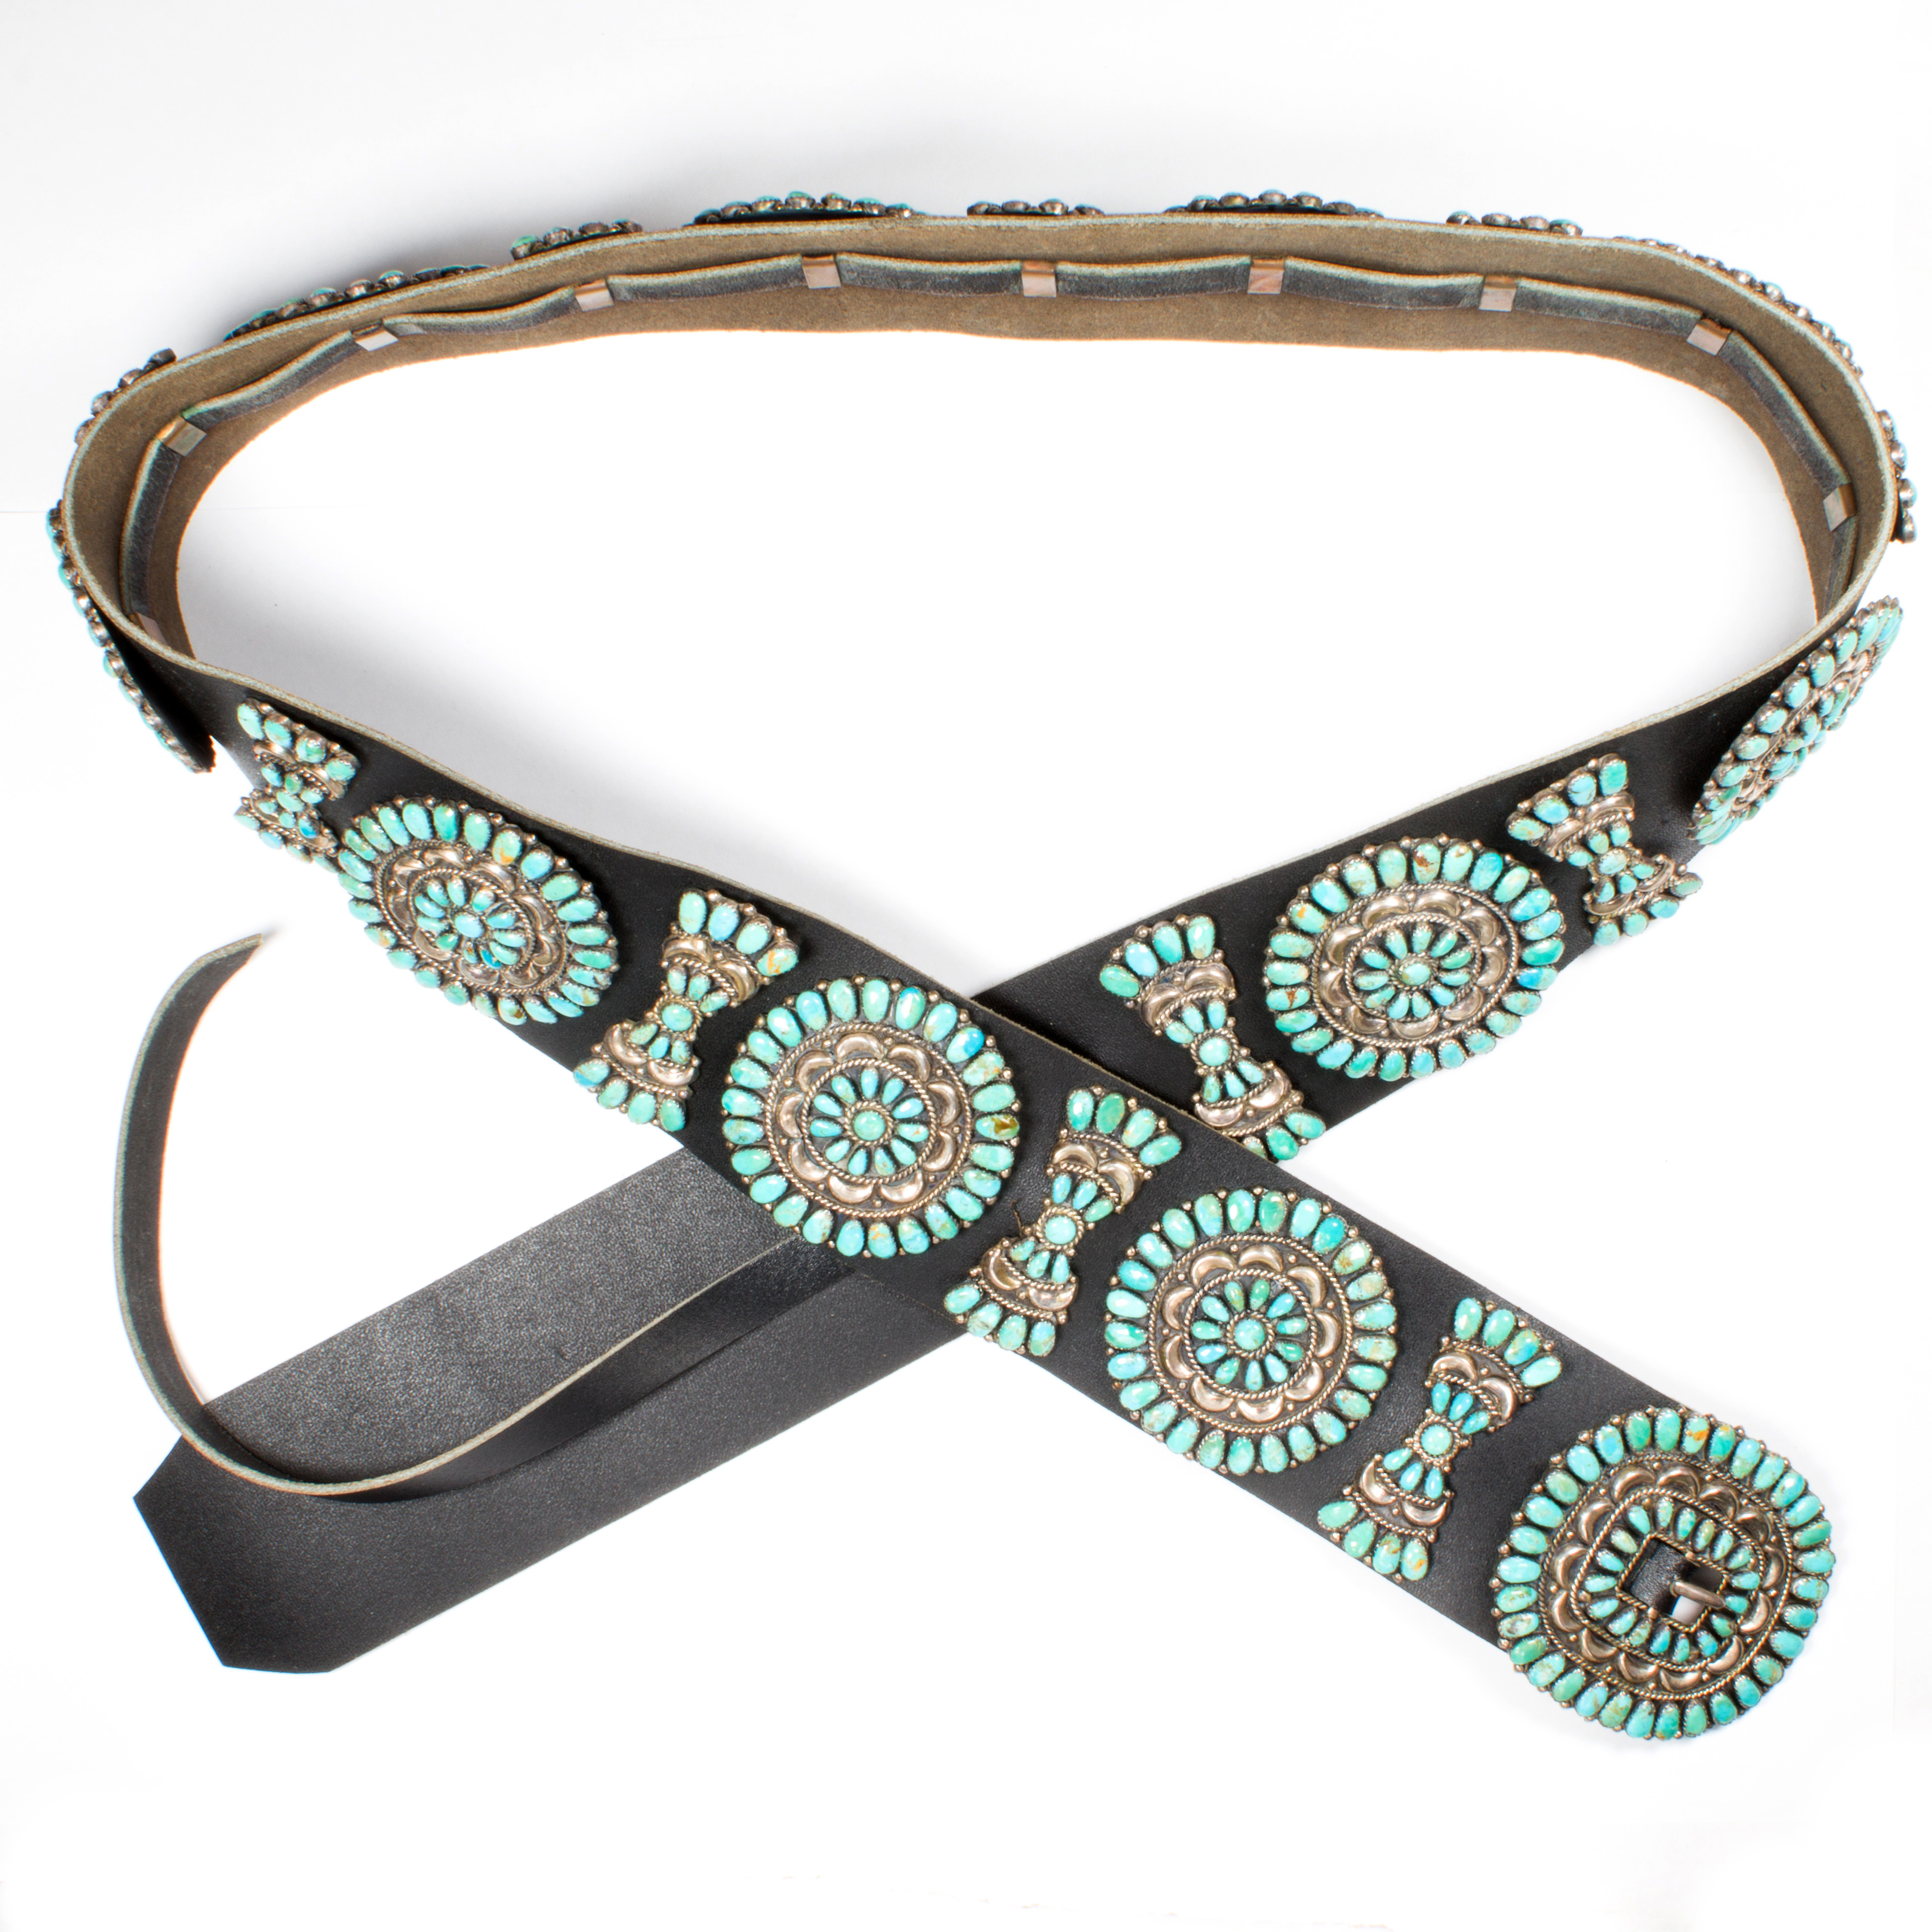 A TURQUOISE, SILVER AND LEATHER